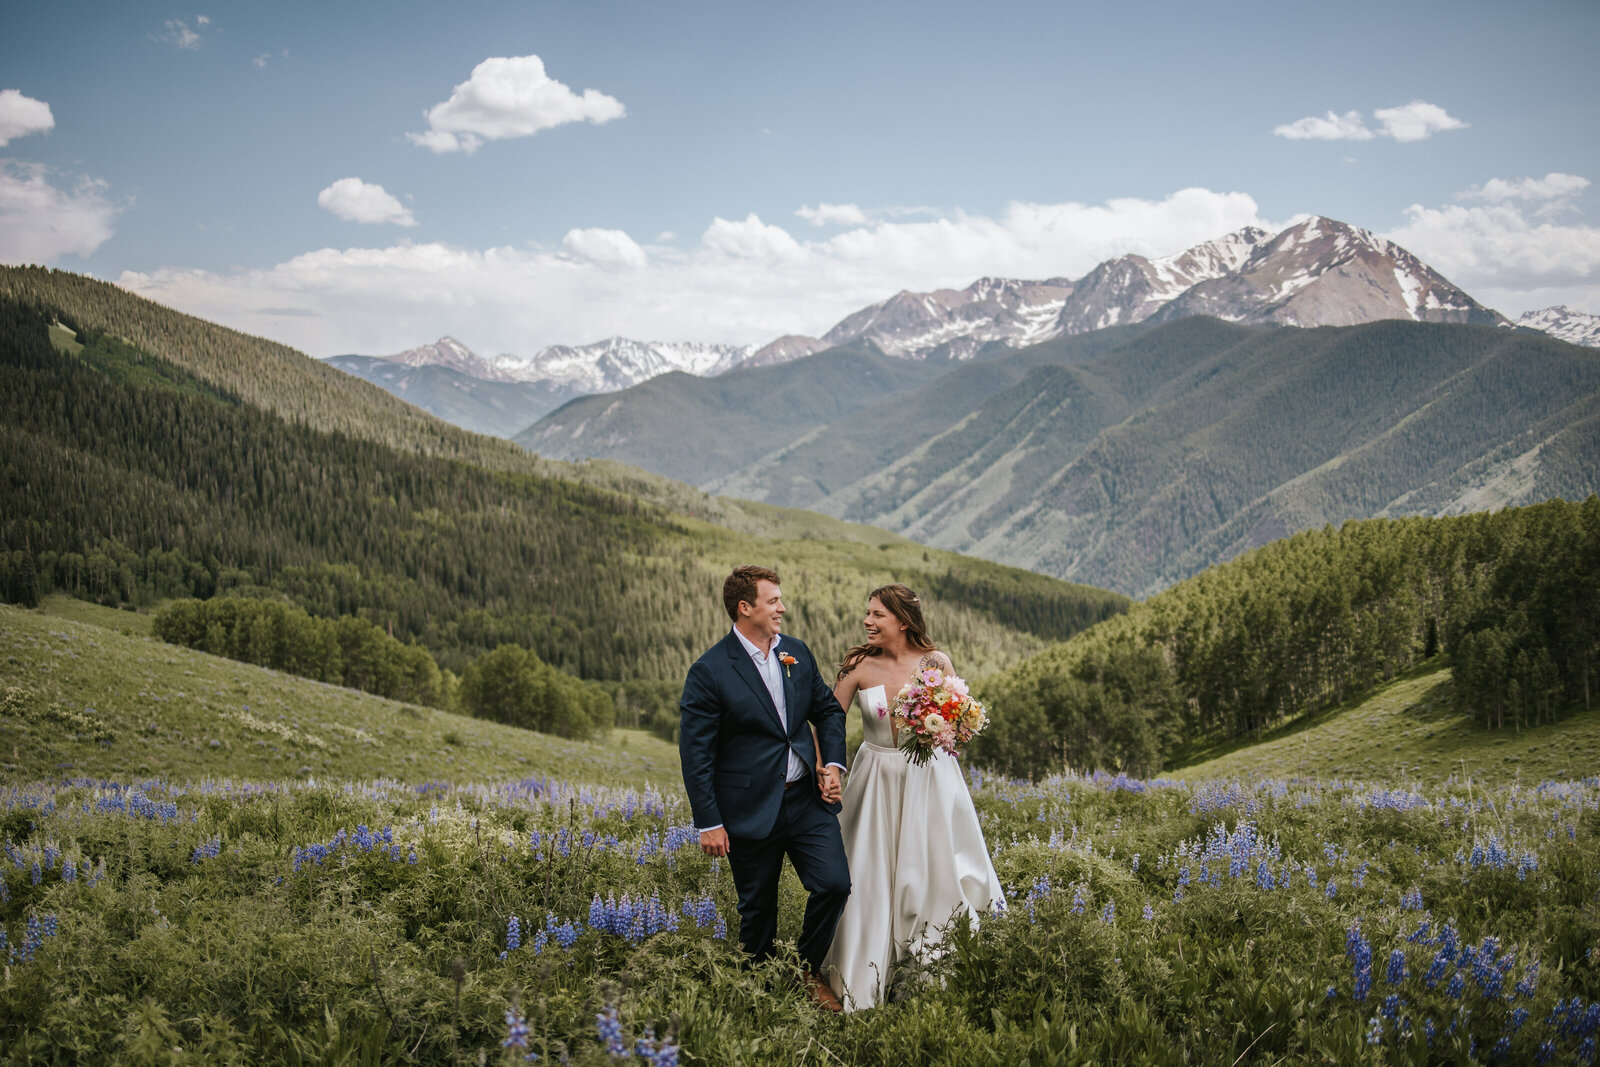 Couple smiling at each other and walking in the wildflowers in the mountains on their elopement wedding day.